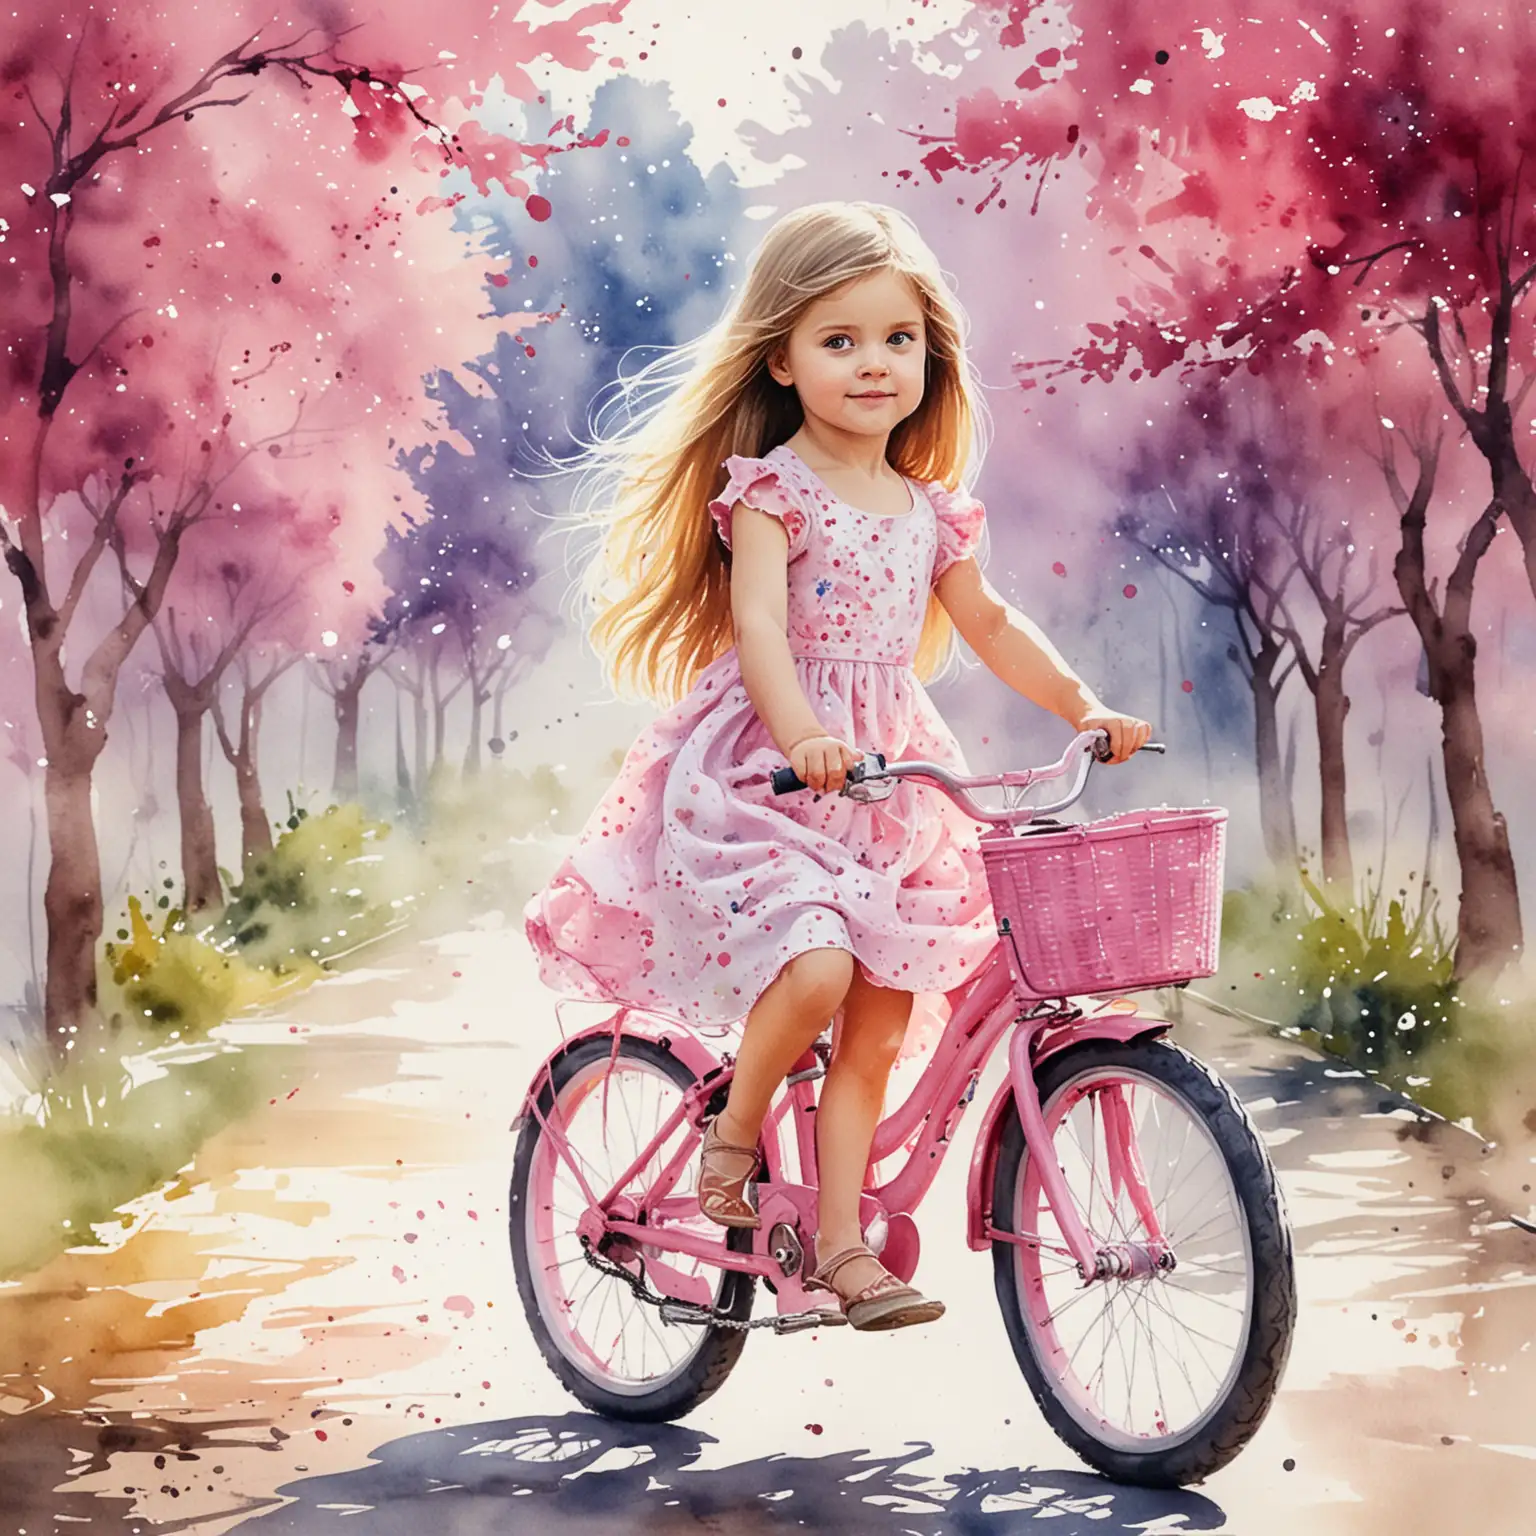 Little Girl Riding Pink Bike in Watercolor Style with Splash Background